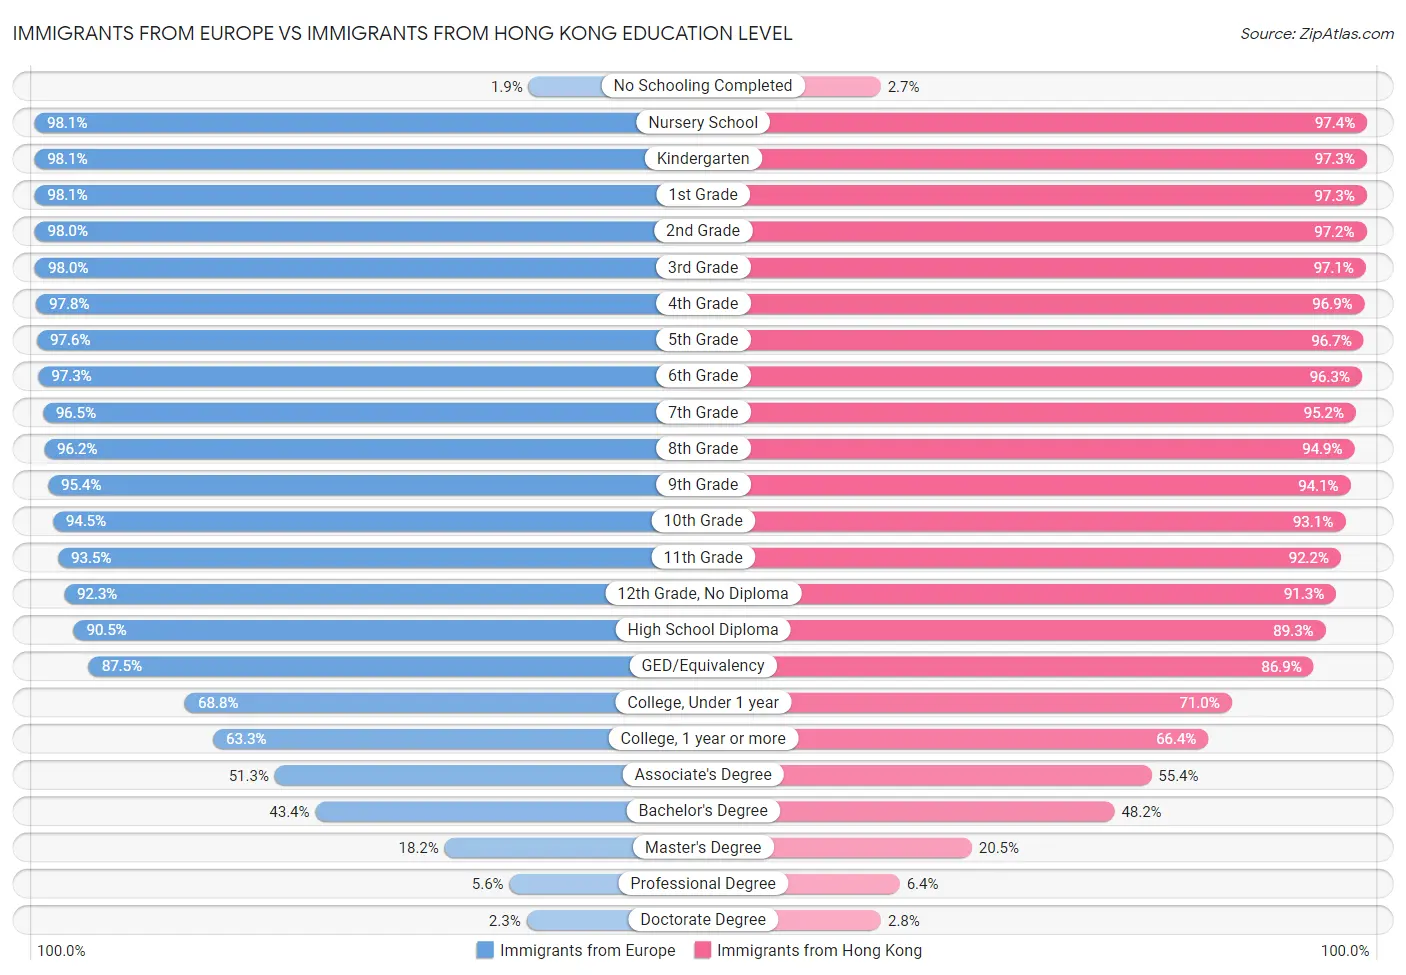 Immigrants from Europe vs Immigrants from Hong Kong Education Level